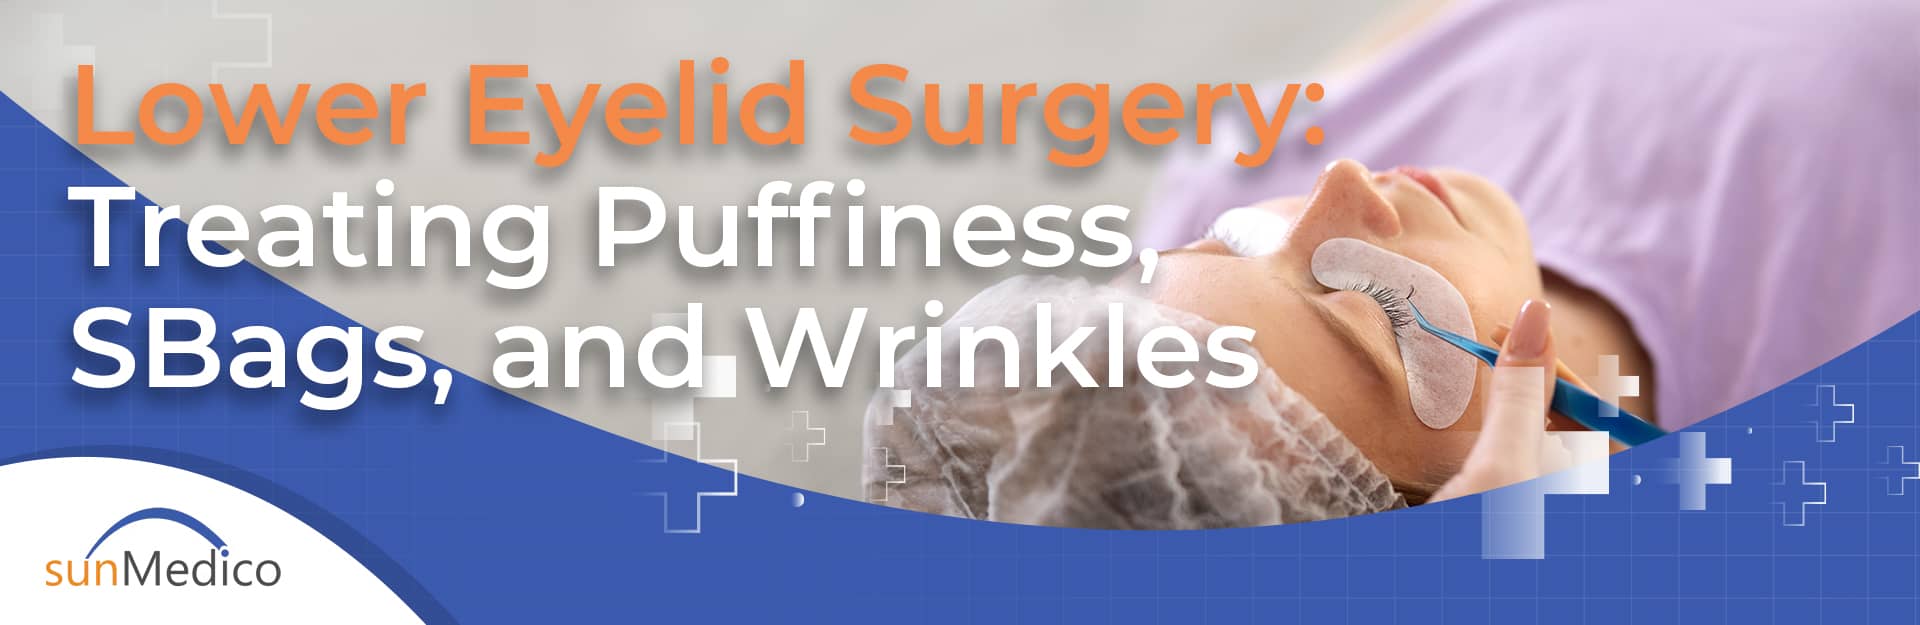 Lower Eyelid Surgery: Treating Puffiness, Bags, and Wrinkles